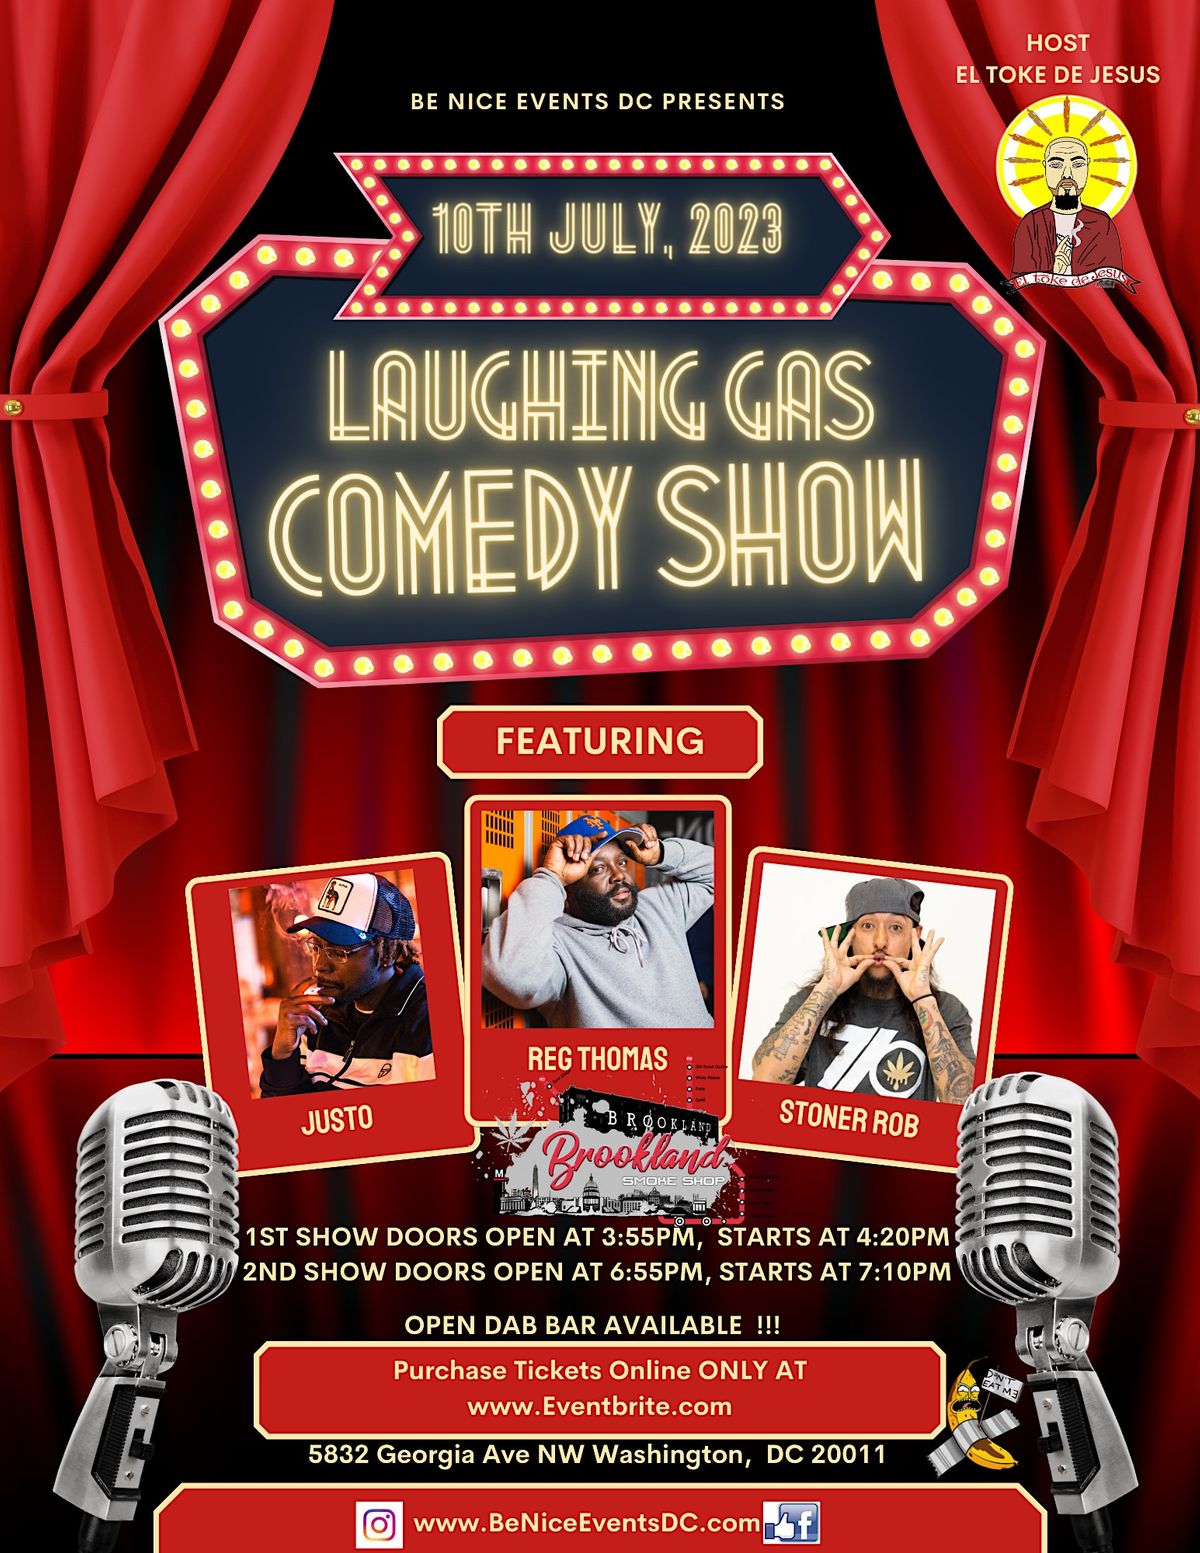 The Laughing Gas Comedy Show